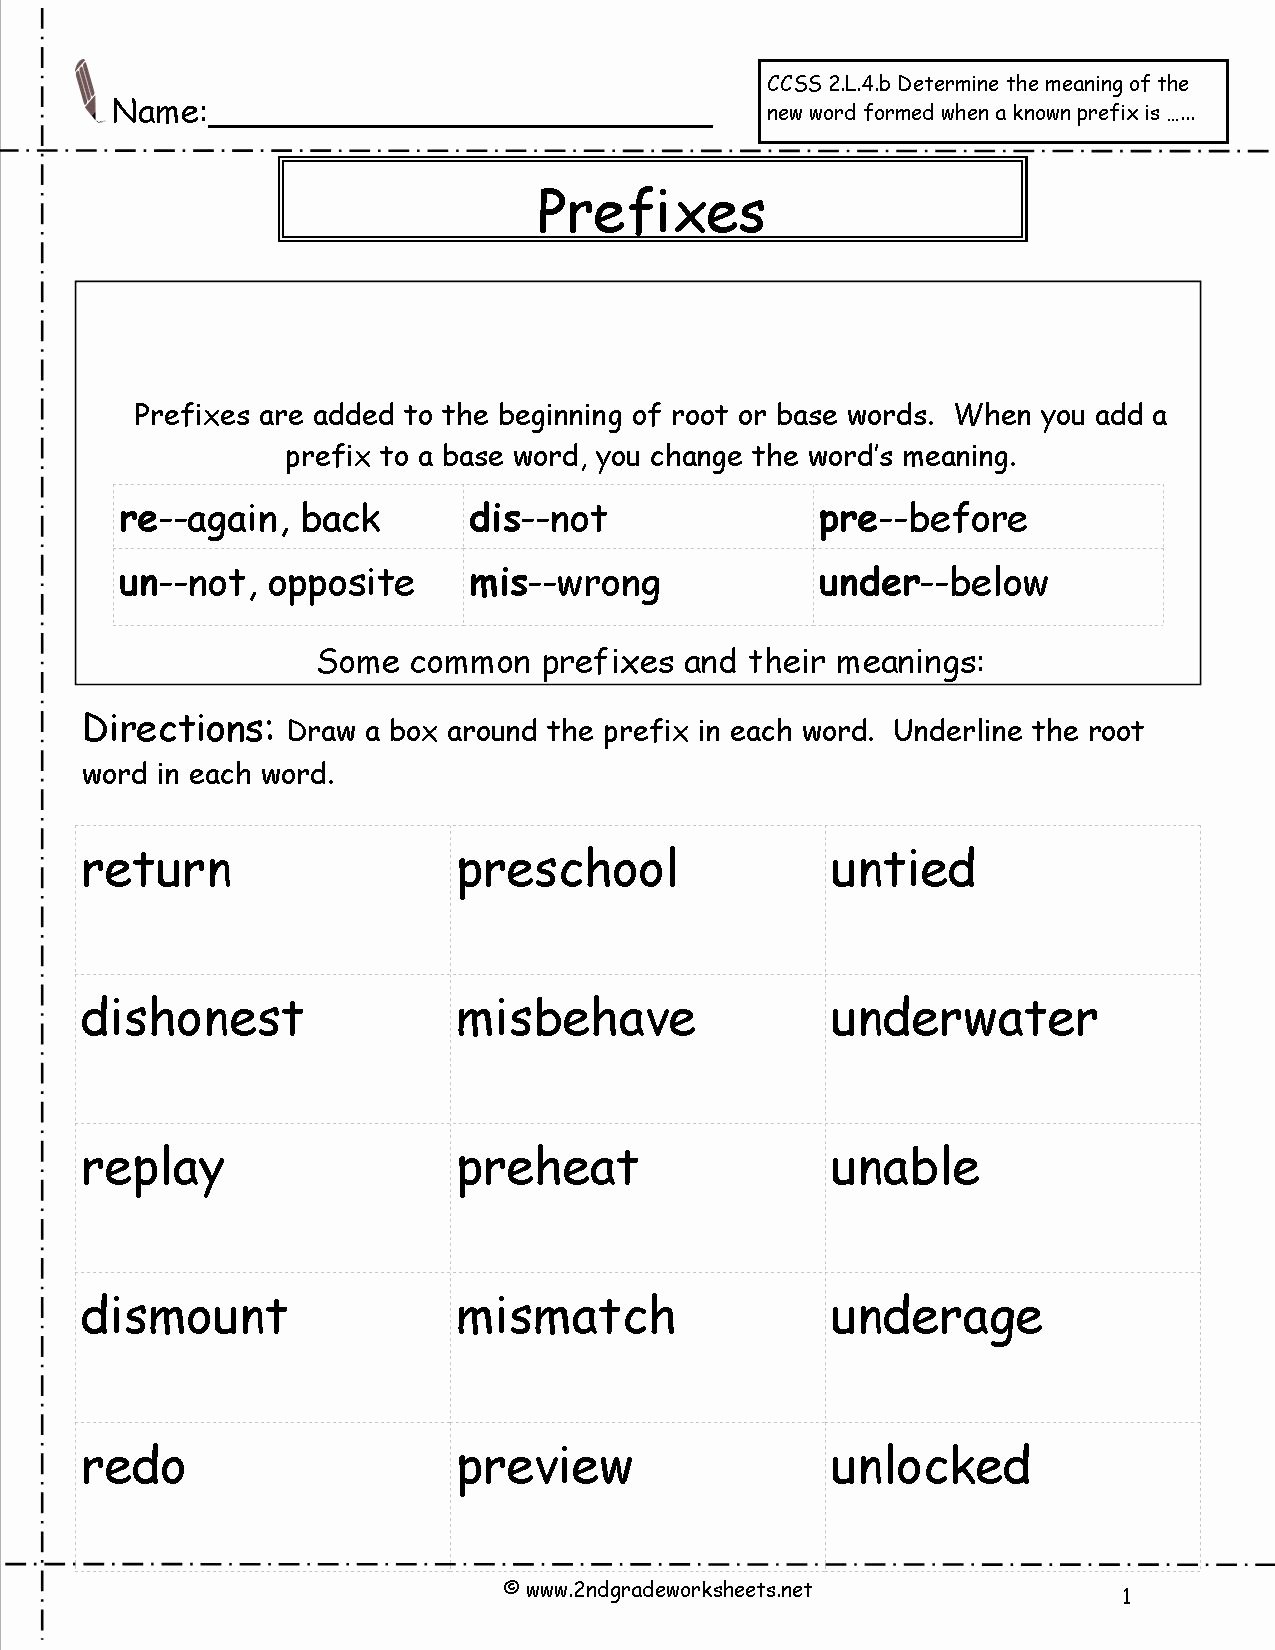 Prefixes and Suffixes Worksheet Lovely Second Grade Prefixes Worksheets